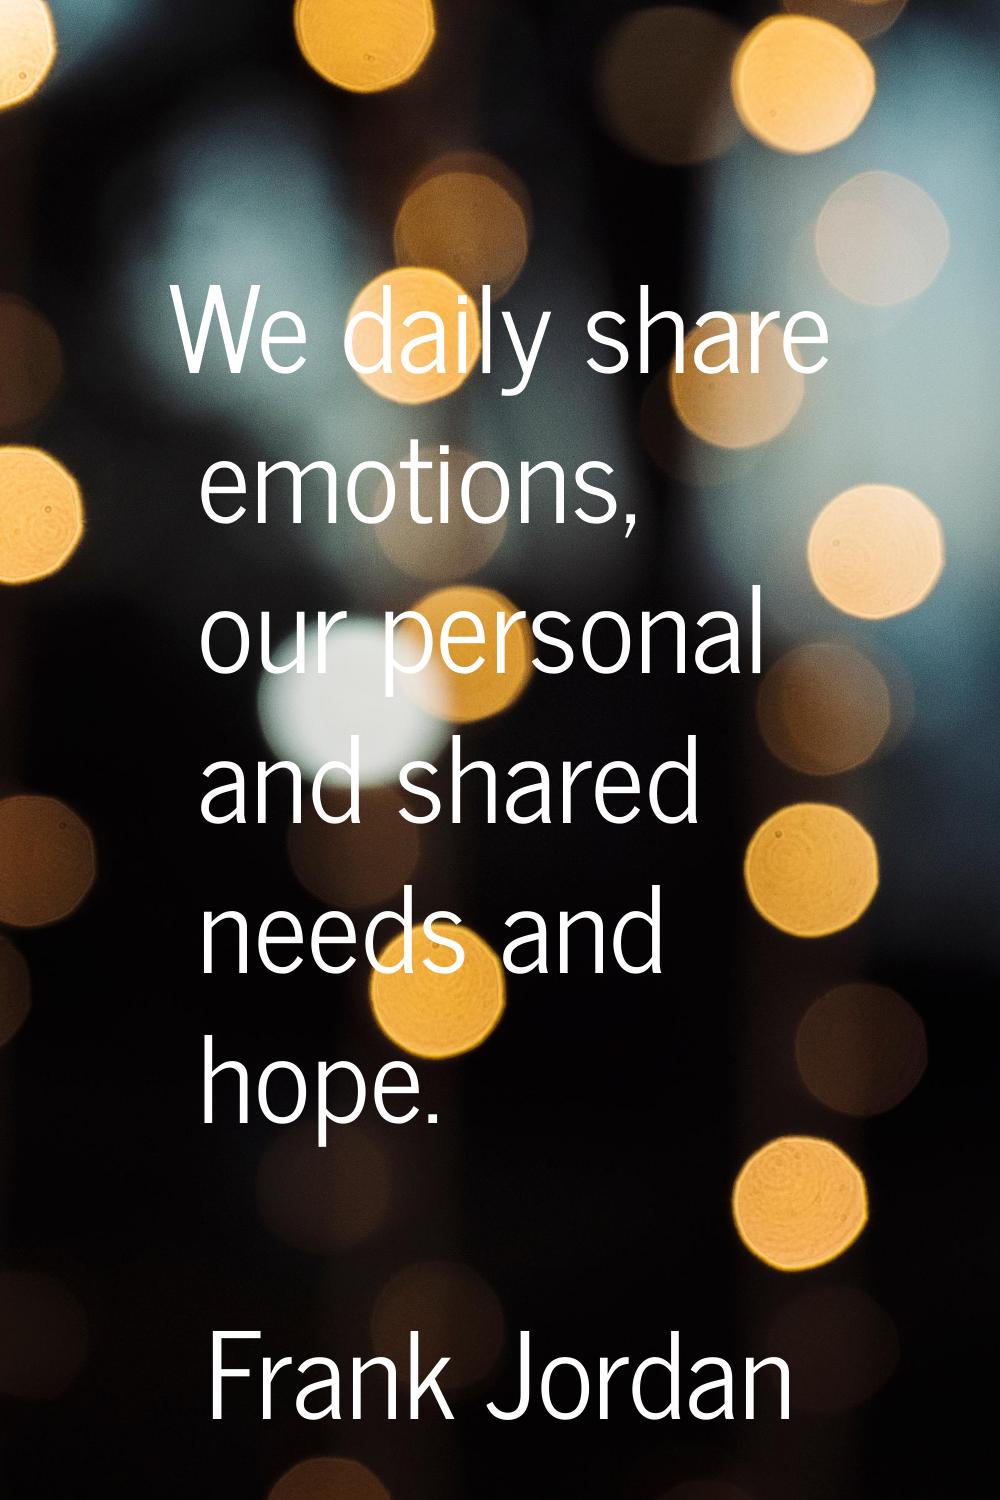 We daily share emotions, our personal and shared needs and hope.